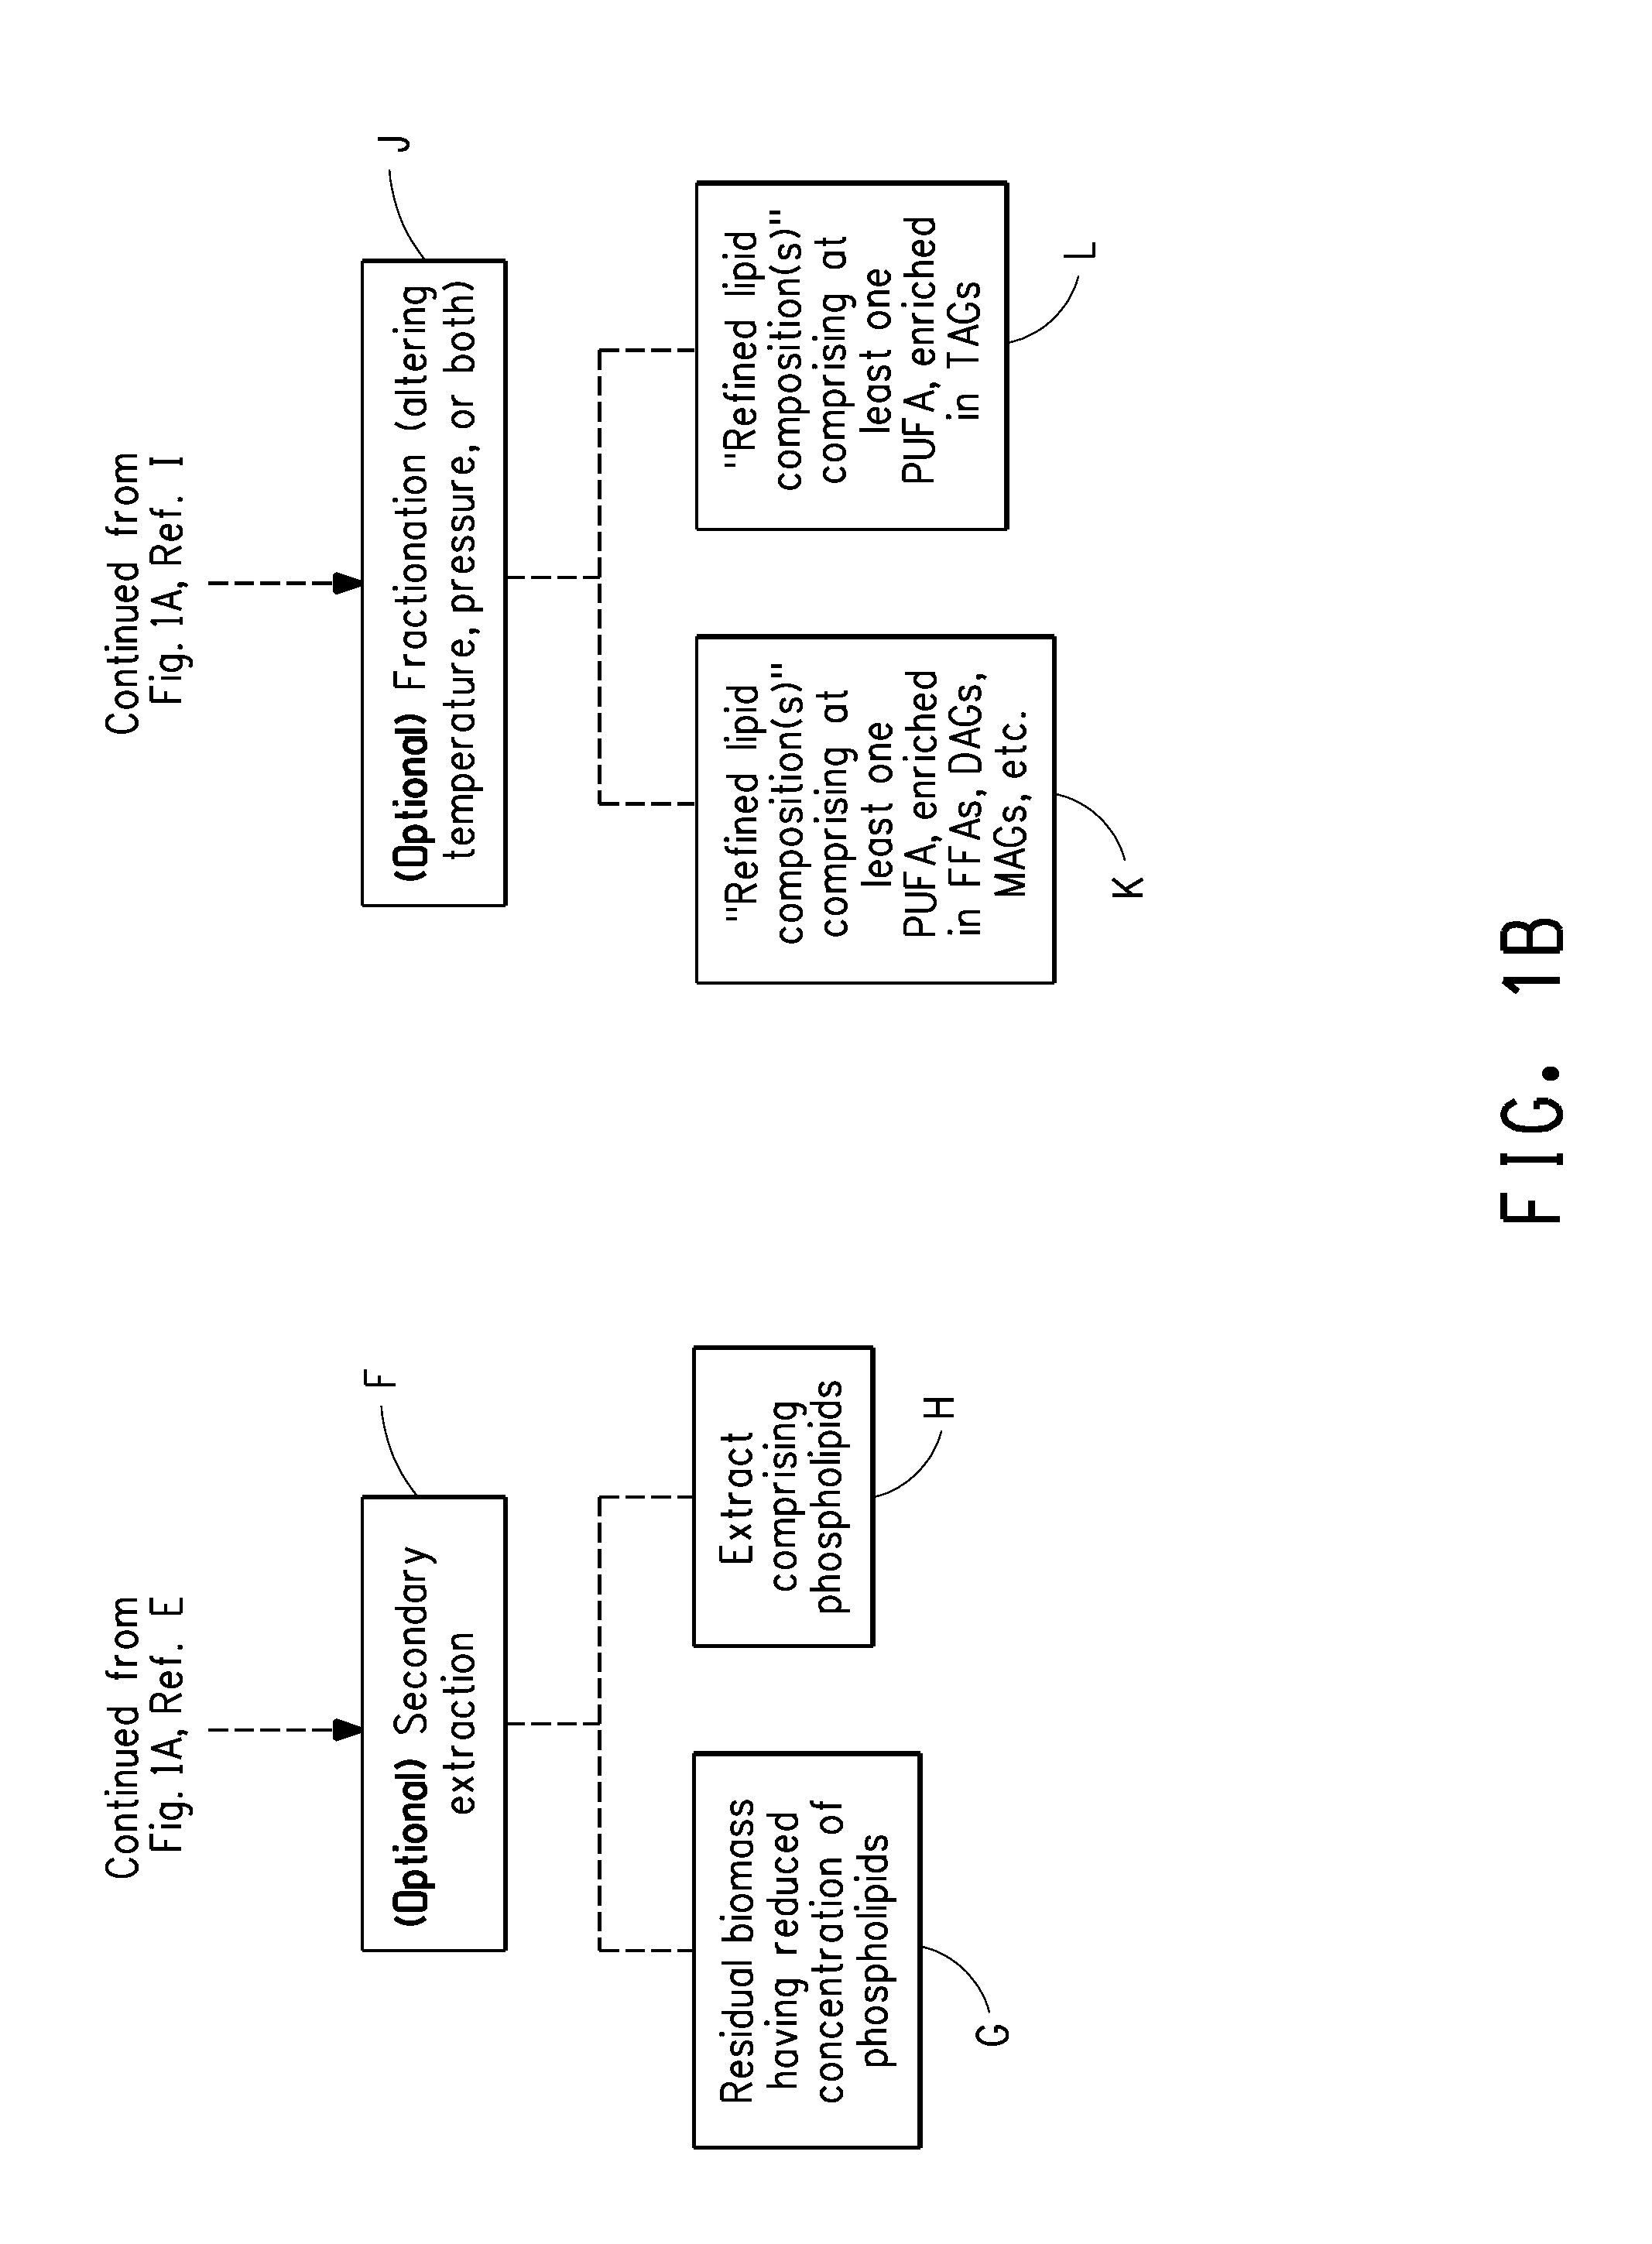 Method for obtaining polyunsaturated fatty acid-containing compositions from microbial biomass